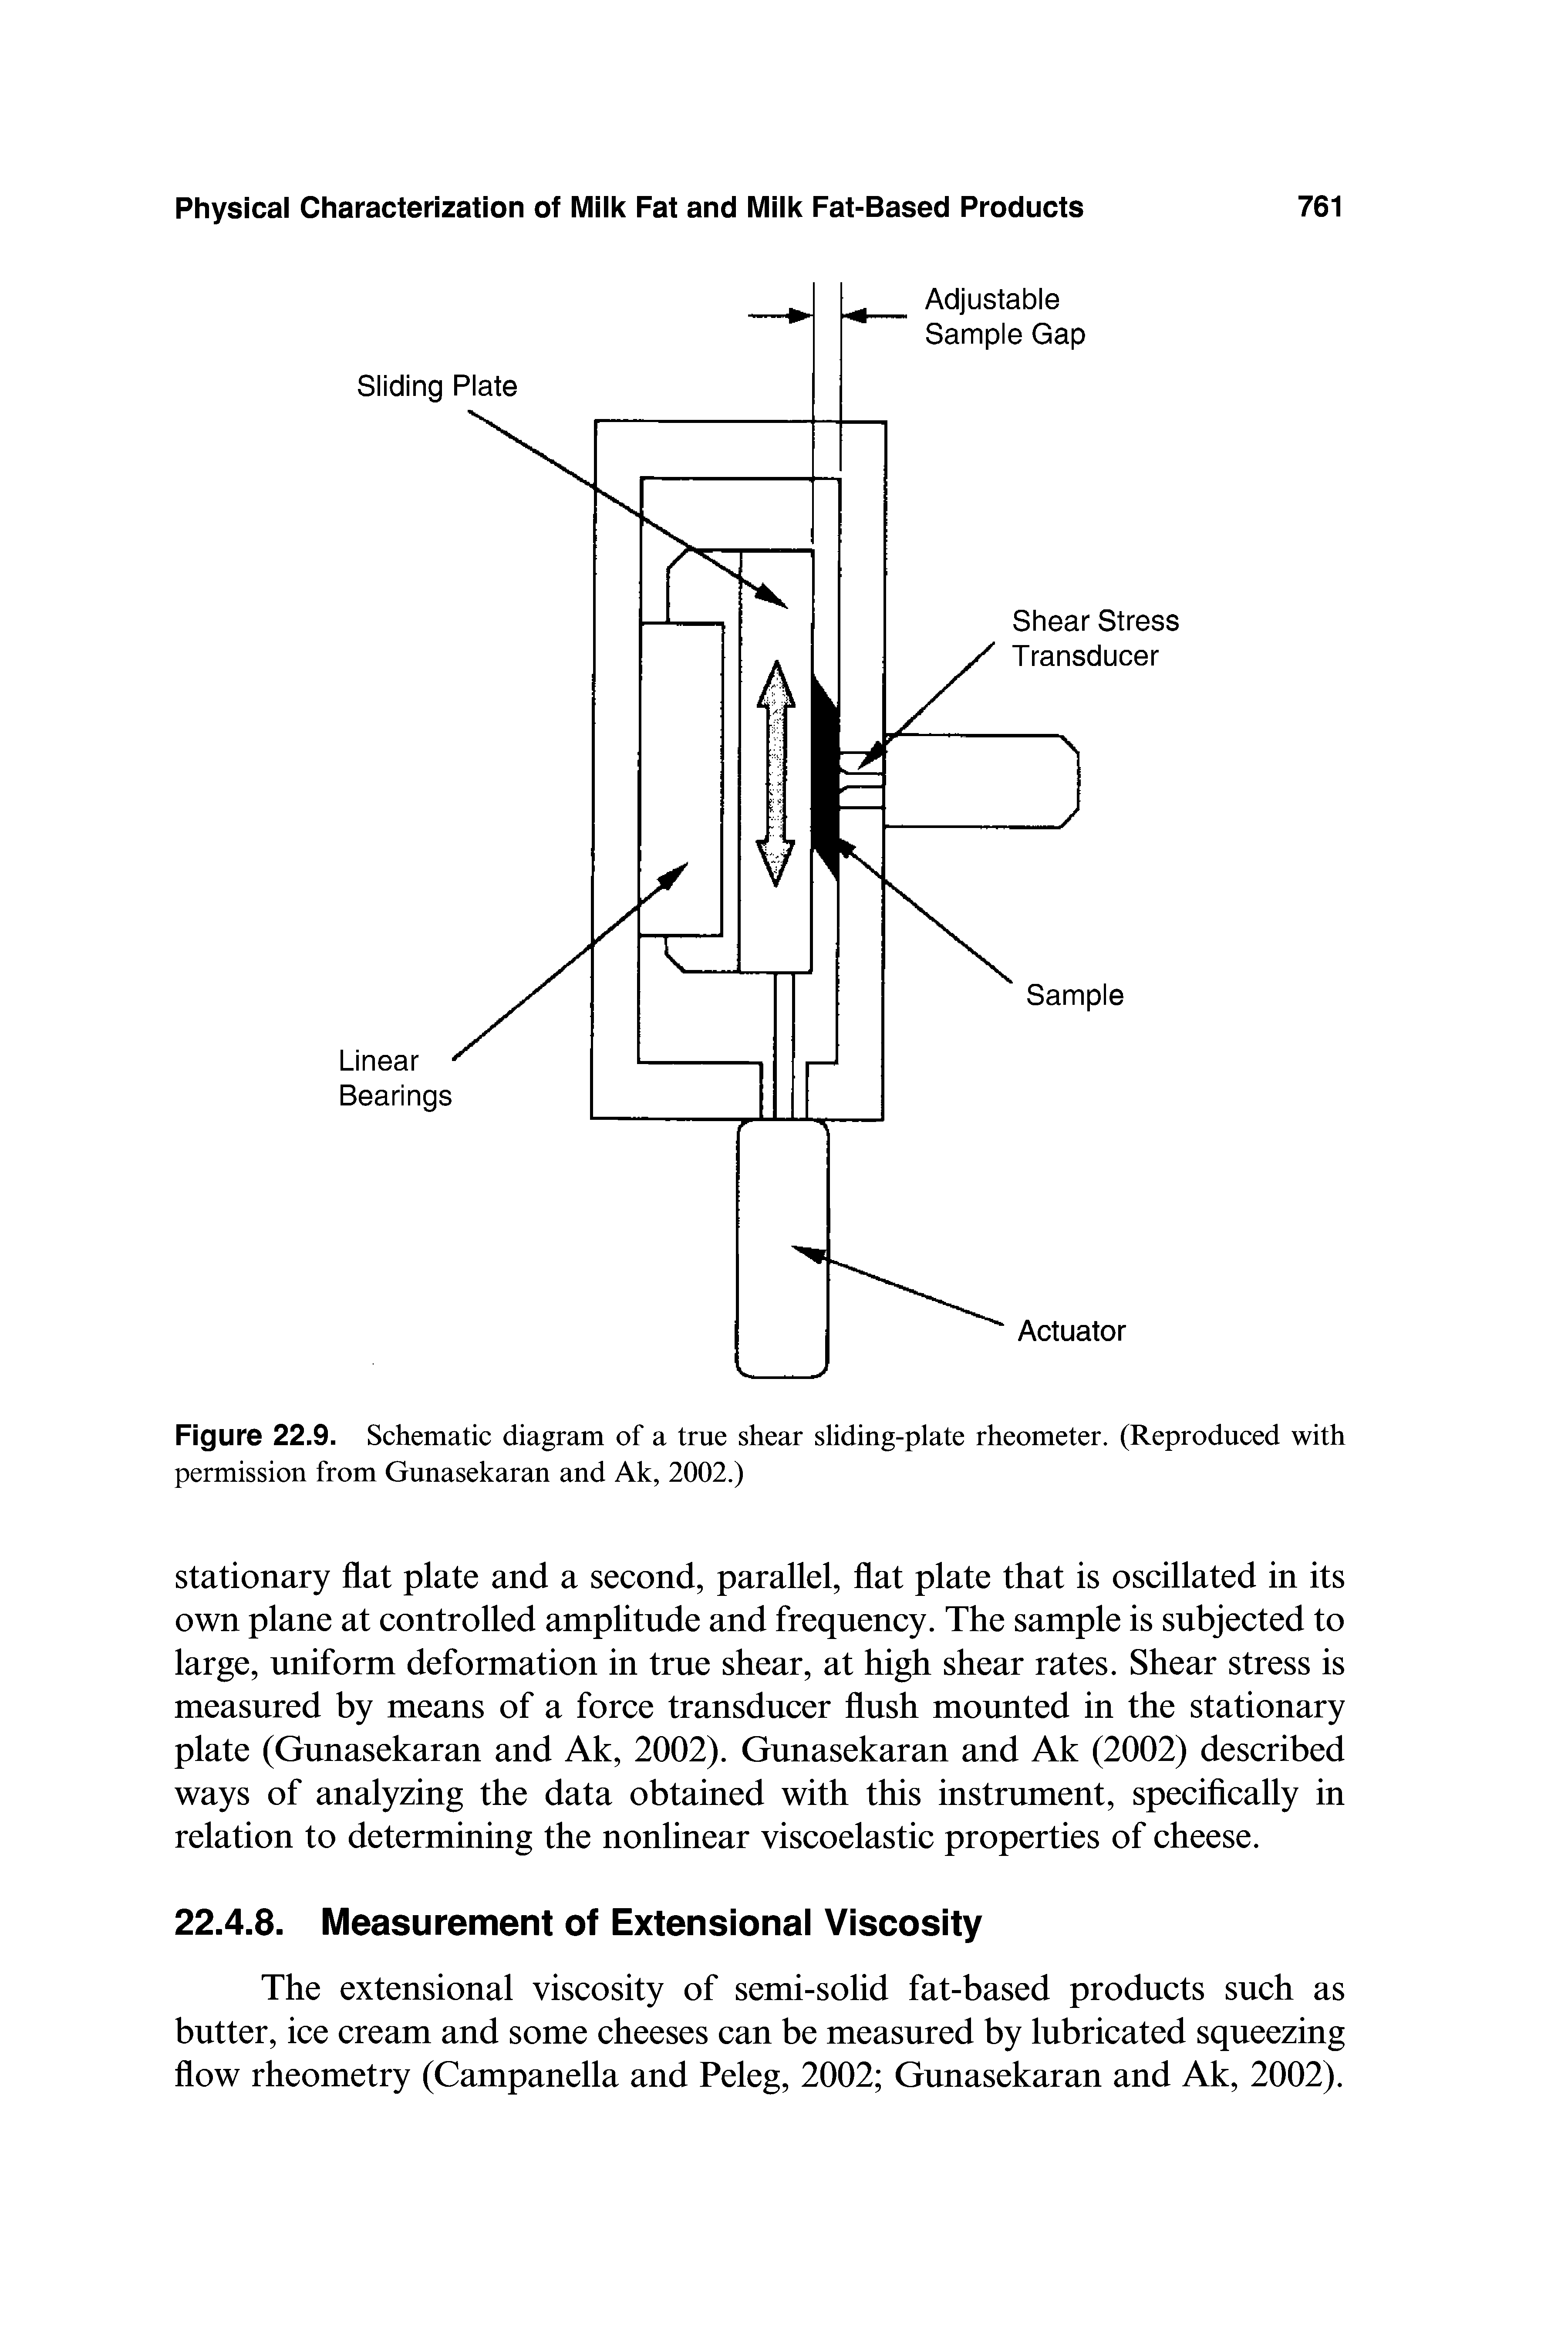 Figure 22.9. Schematic diagram of a true shear sliding-plate rheometer. (Reproduced with permission from Gunasekaran and Ak, 2002.)...